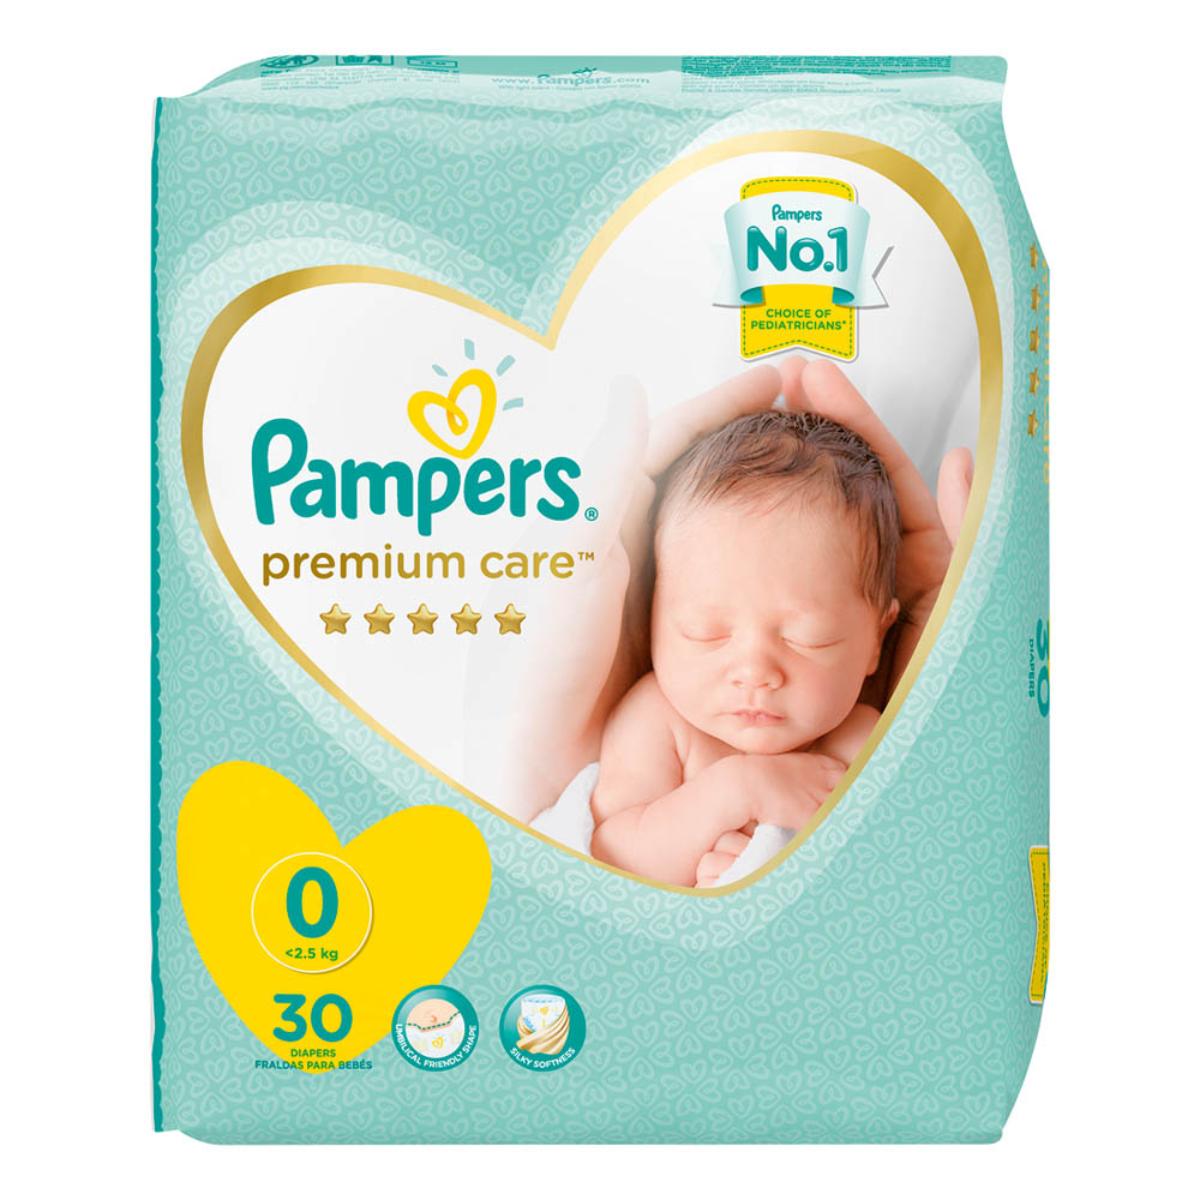 carrefour pampers cena